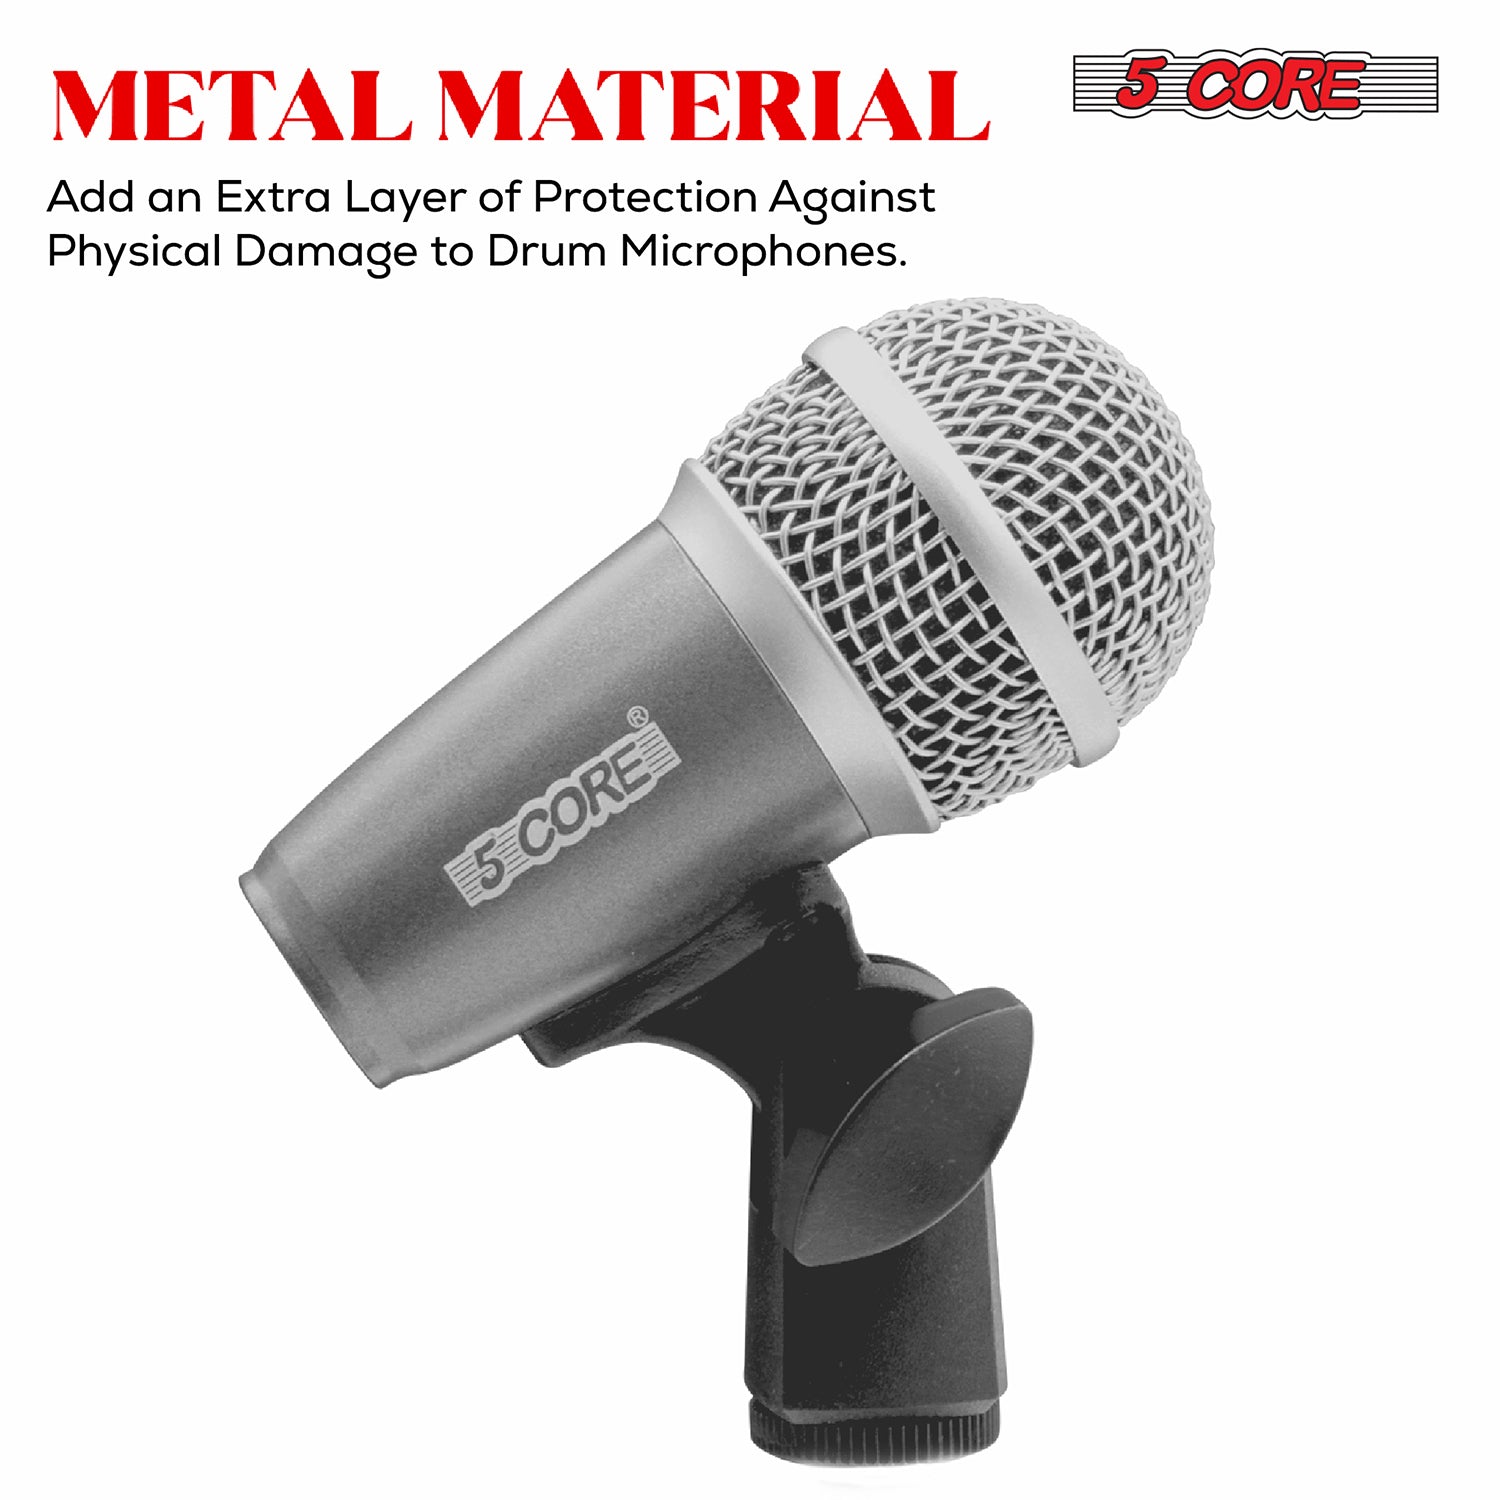 Versatile 9-piece drum microphone set for studio and stage use